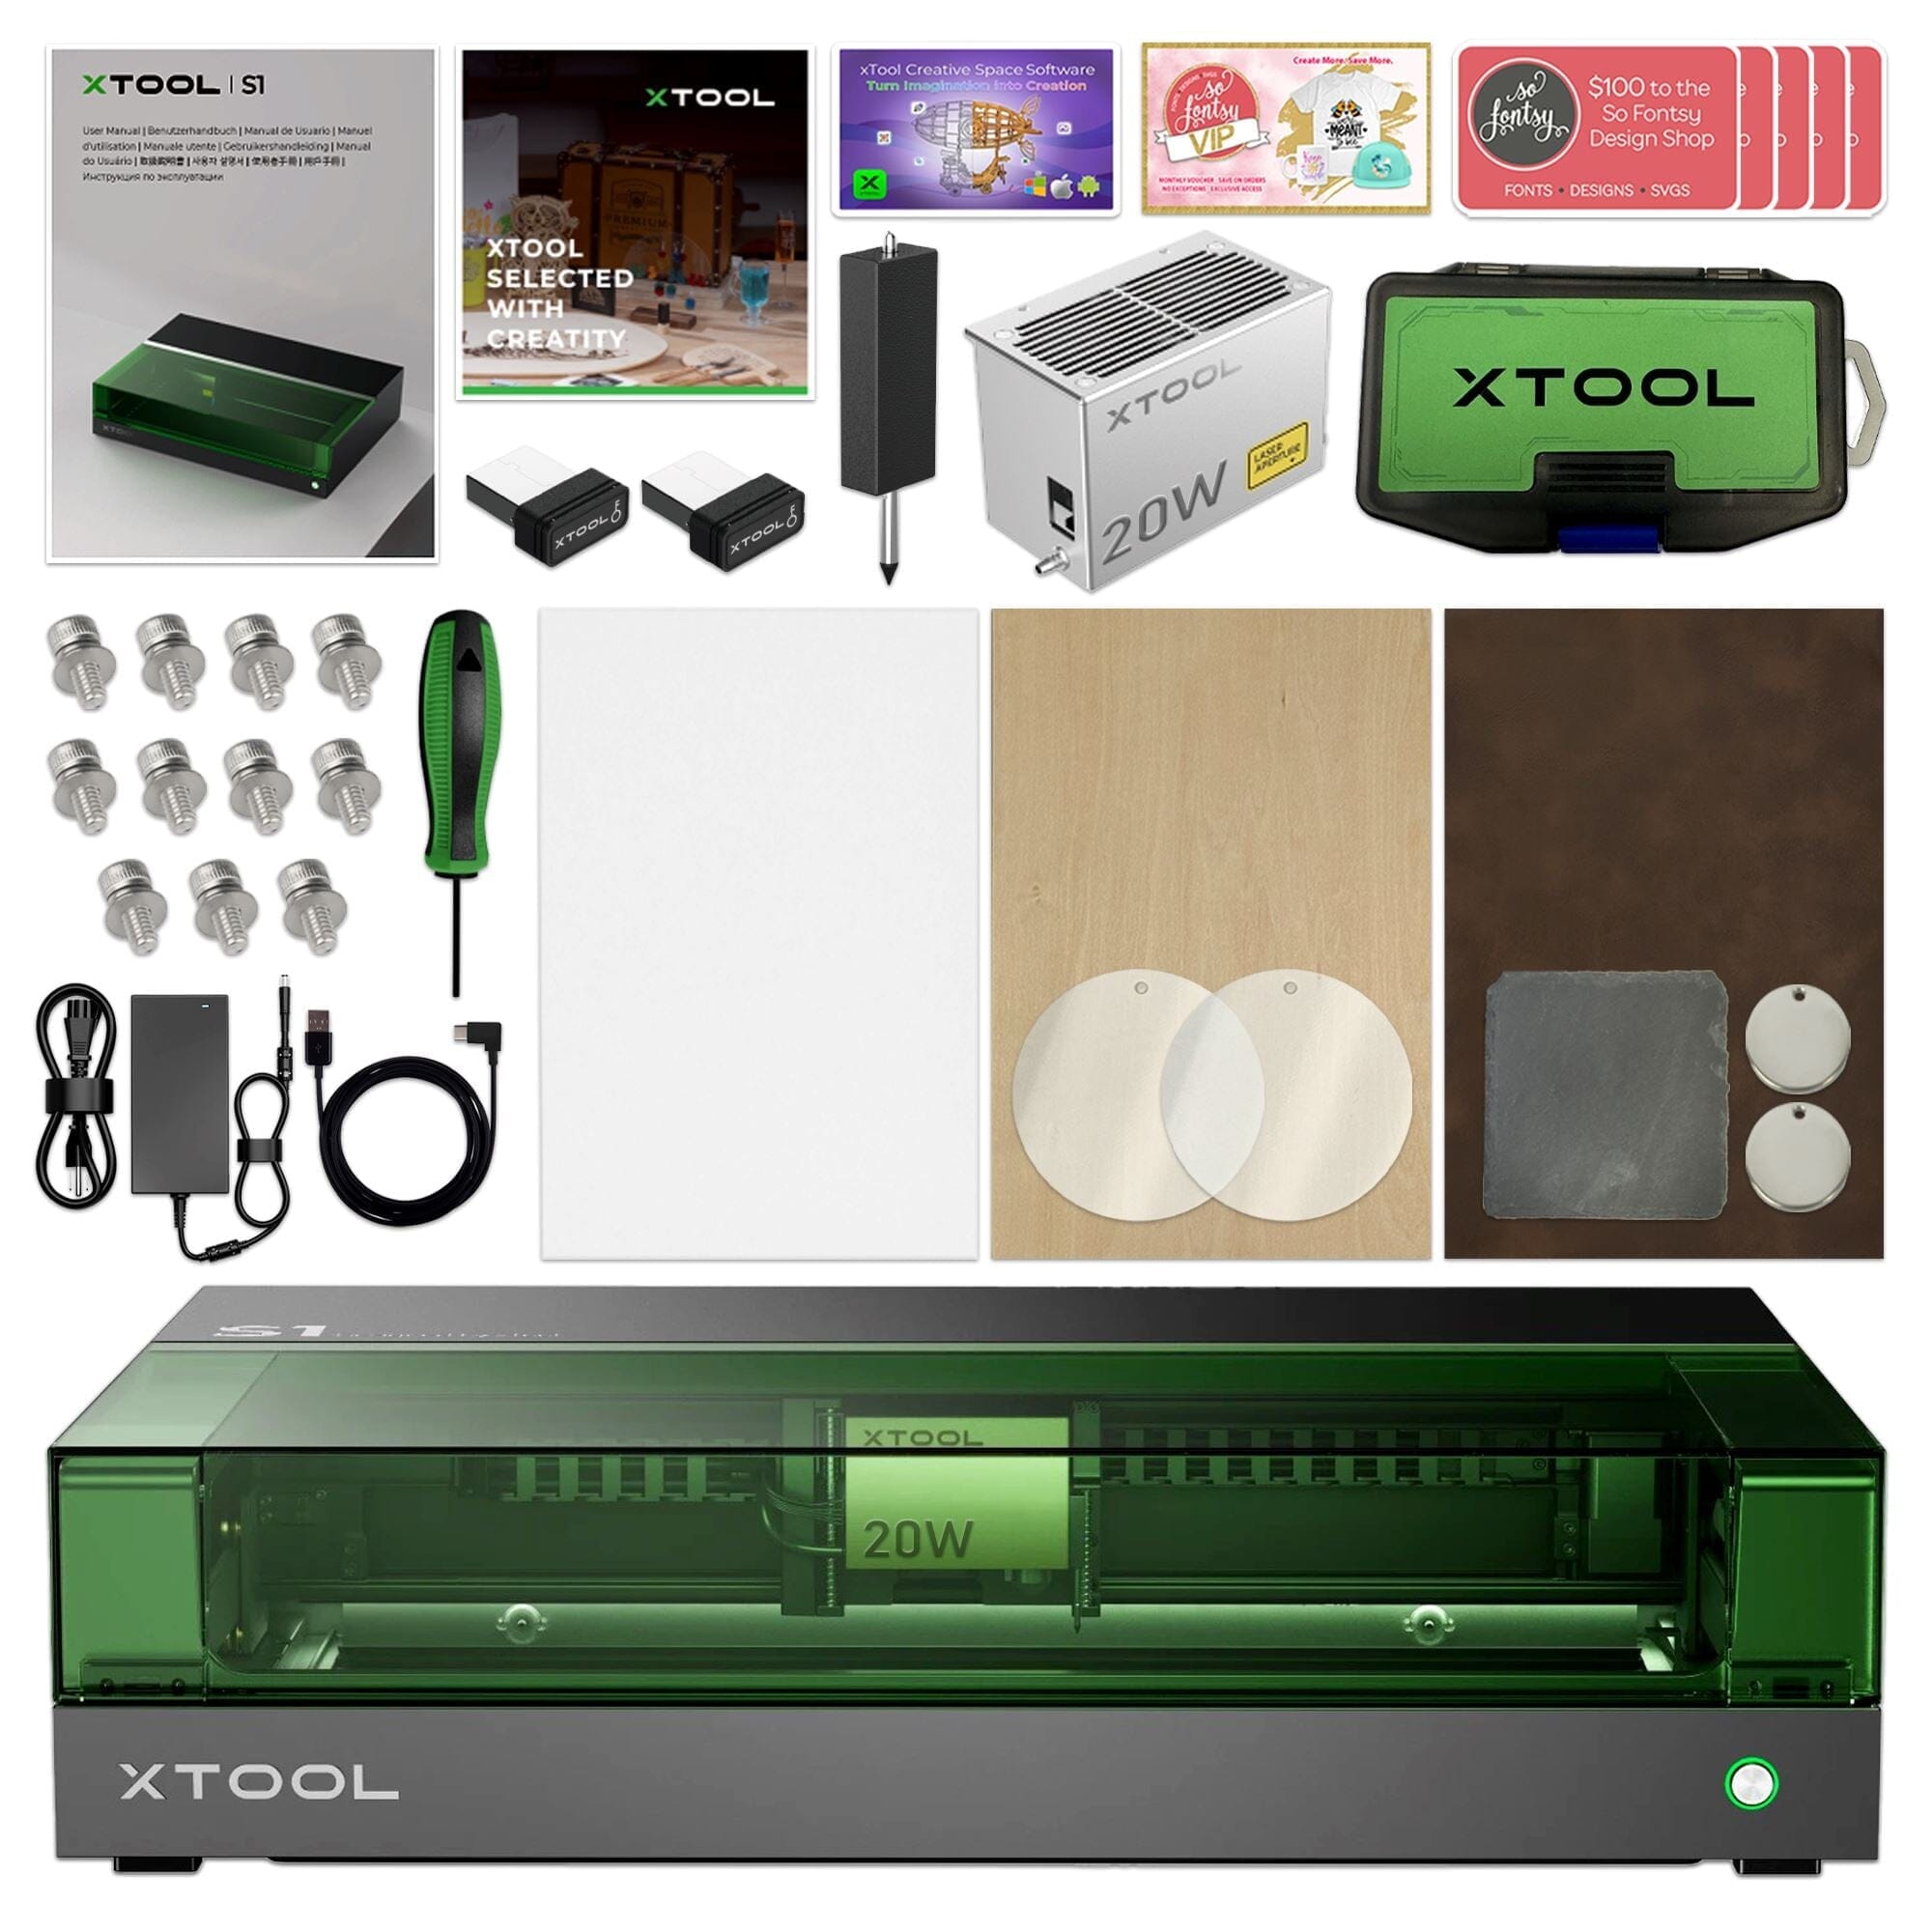 xTool S1 Laser Cutter & Engraver Machine with Deluxe Screen Printing Bundle